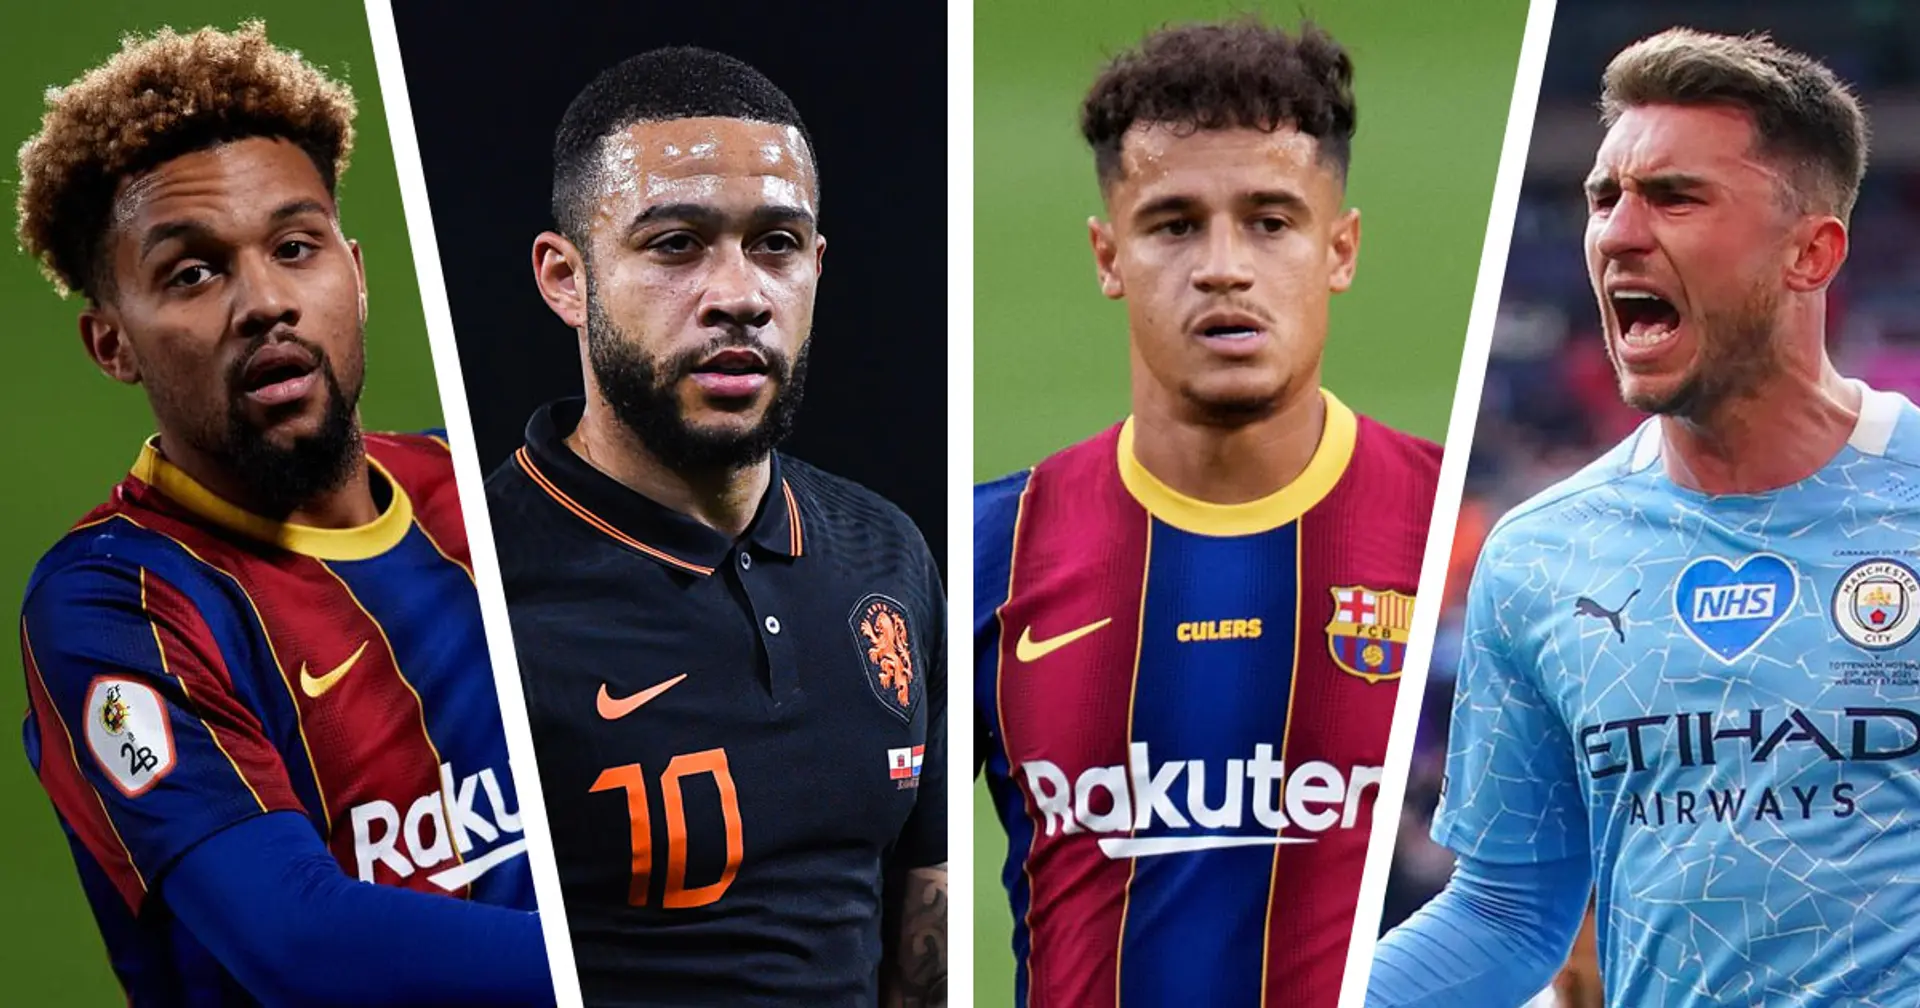 Laporte in, Coutinho out: 10-name transfer round-up at Barca with probability ratings